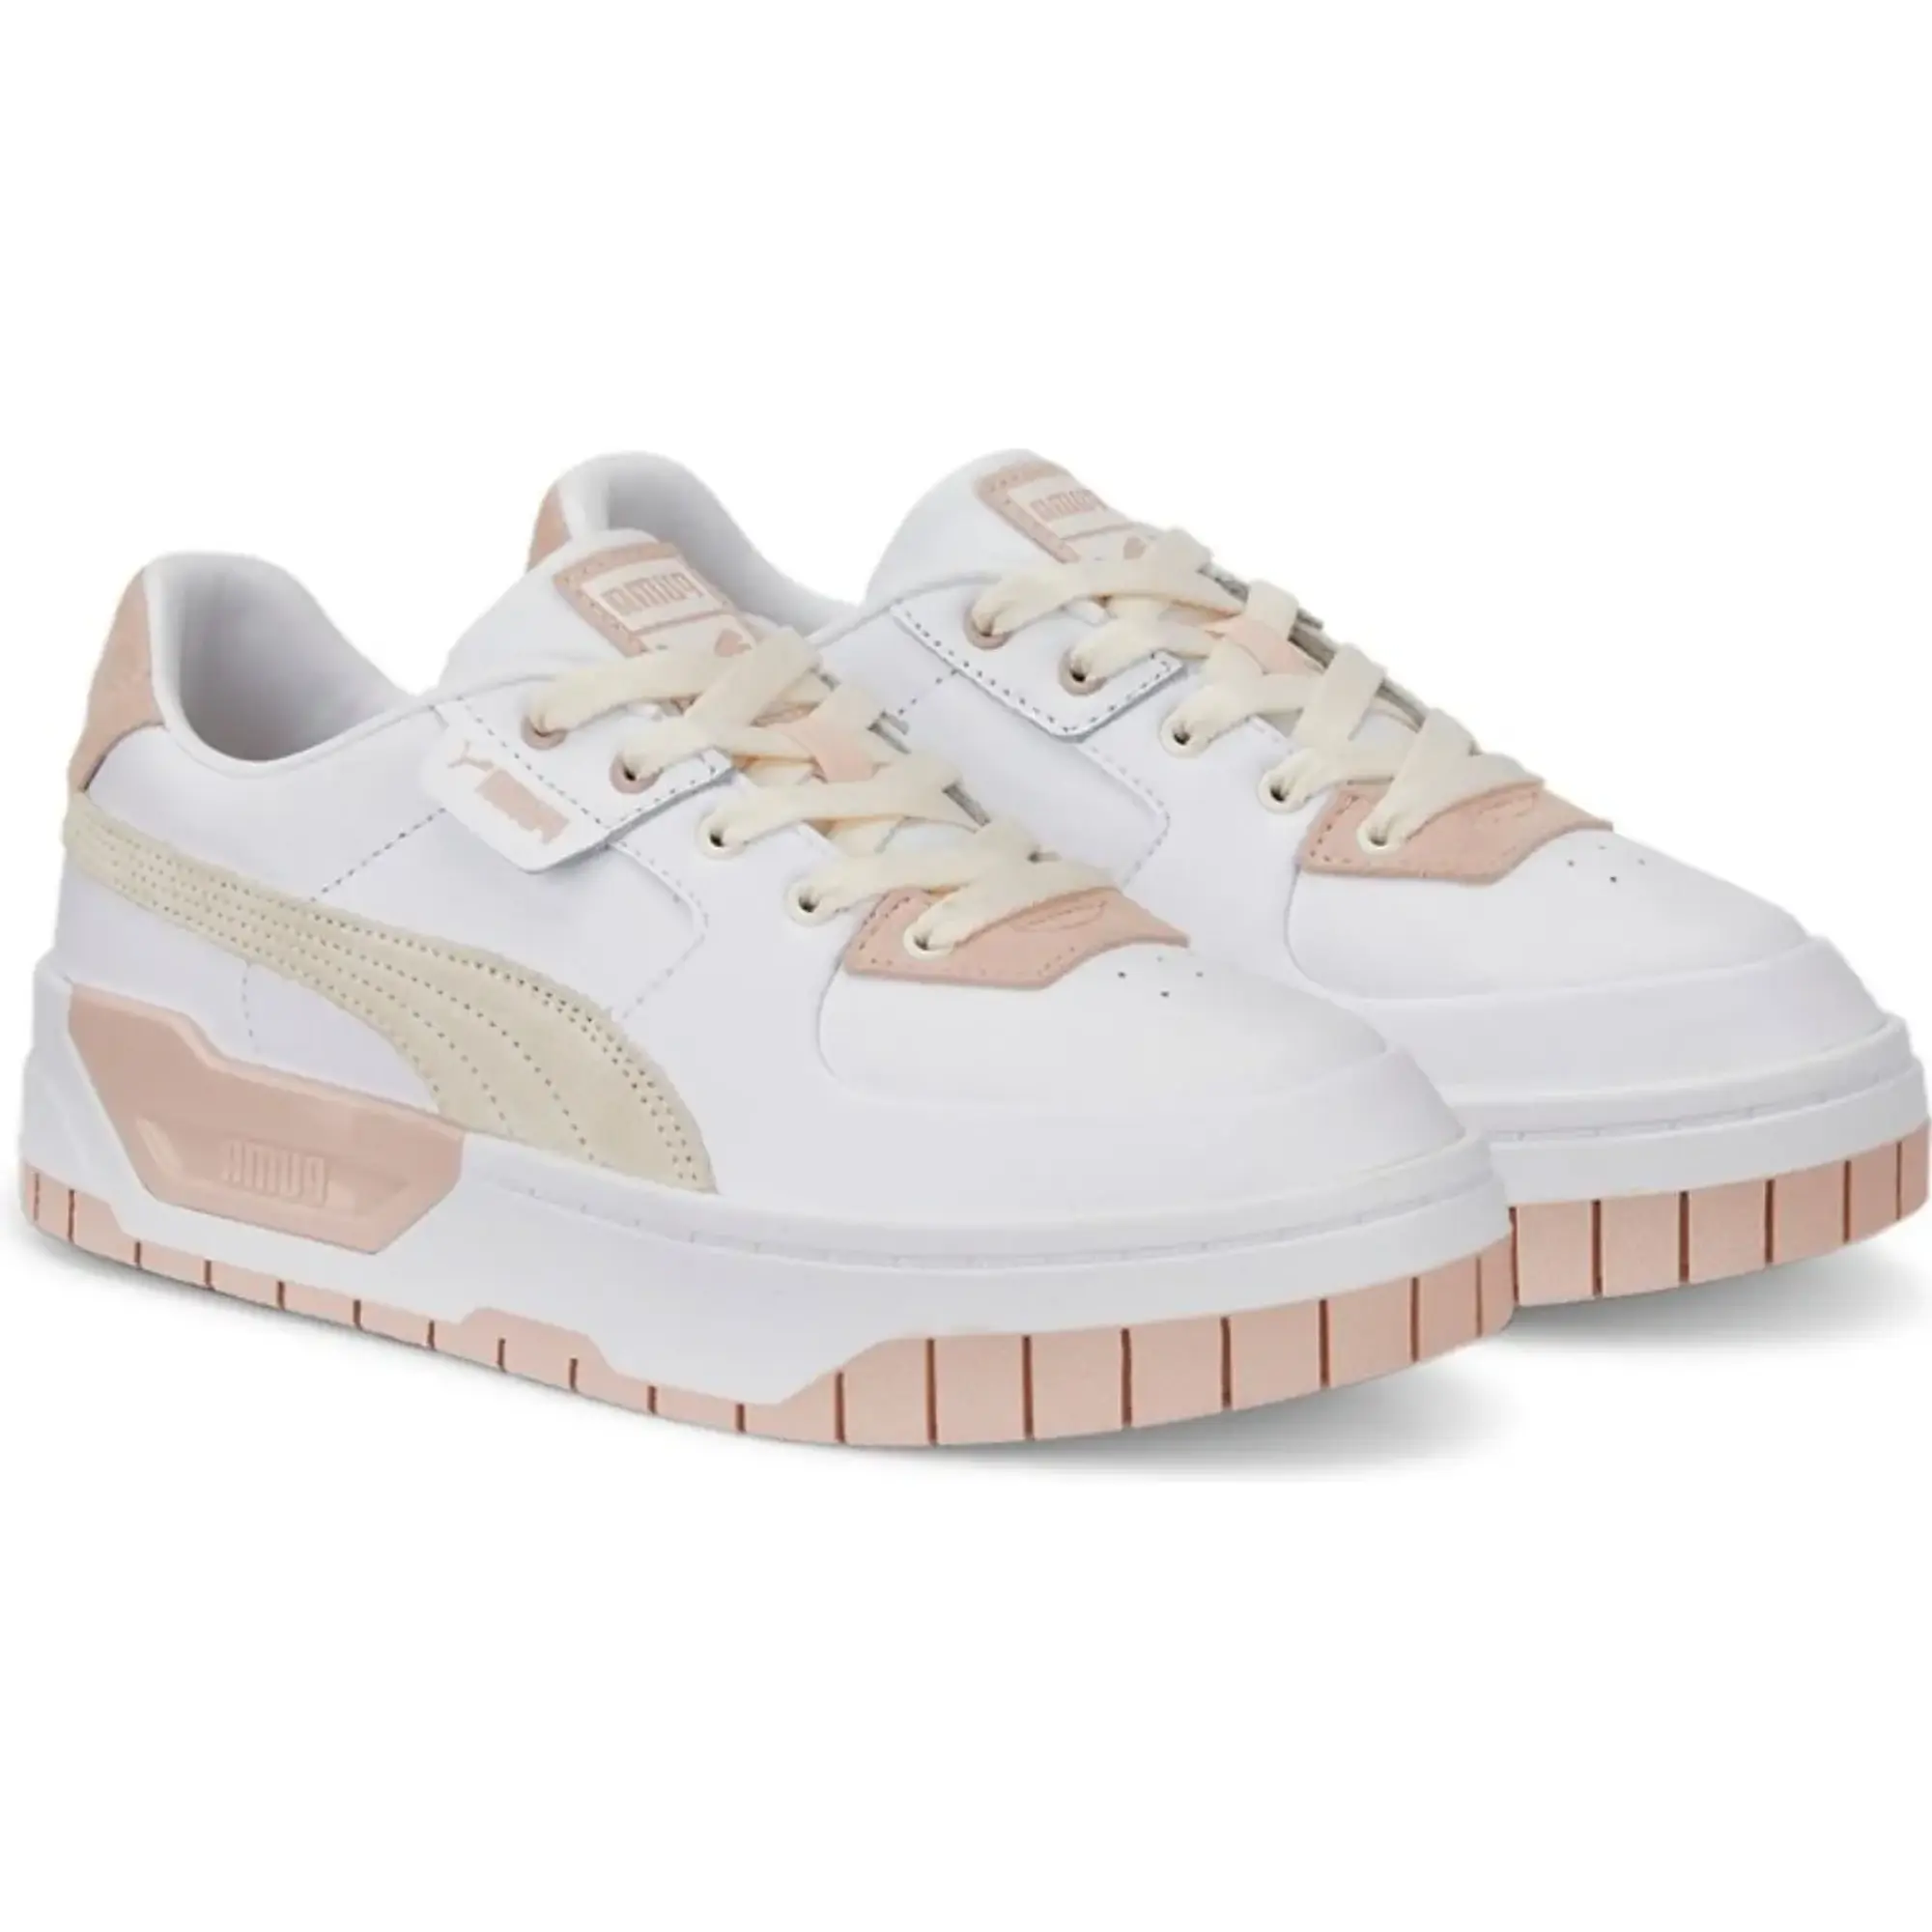 Puma Cali Dream Colour Pop Trainers In White And Pink